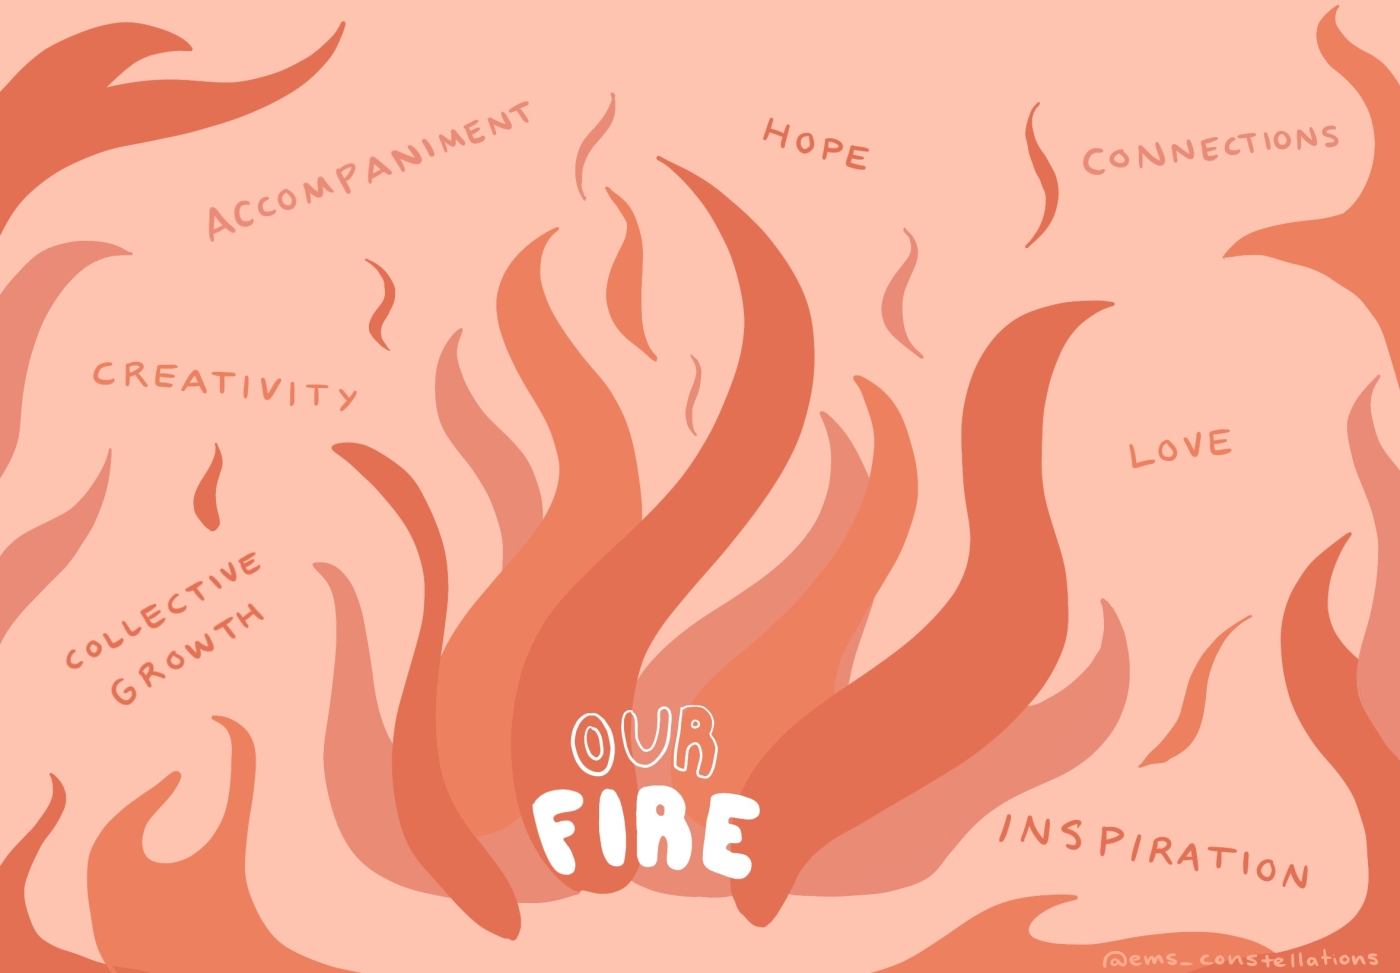 Orange illustration of a fire, surrounded by words including creativity, accompaniment, hope, connections, love, inspiration, and collective growth.